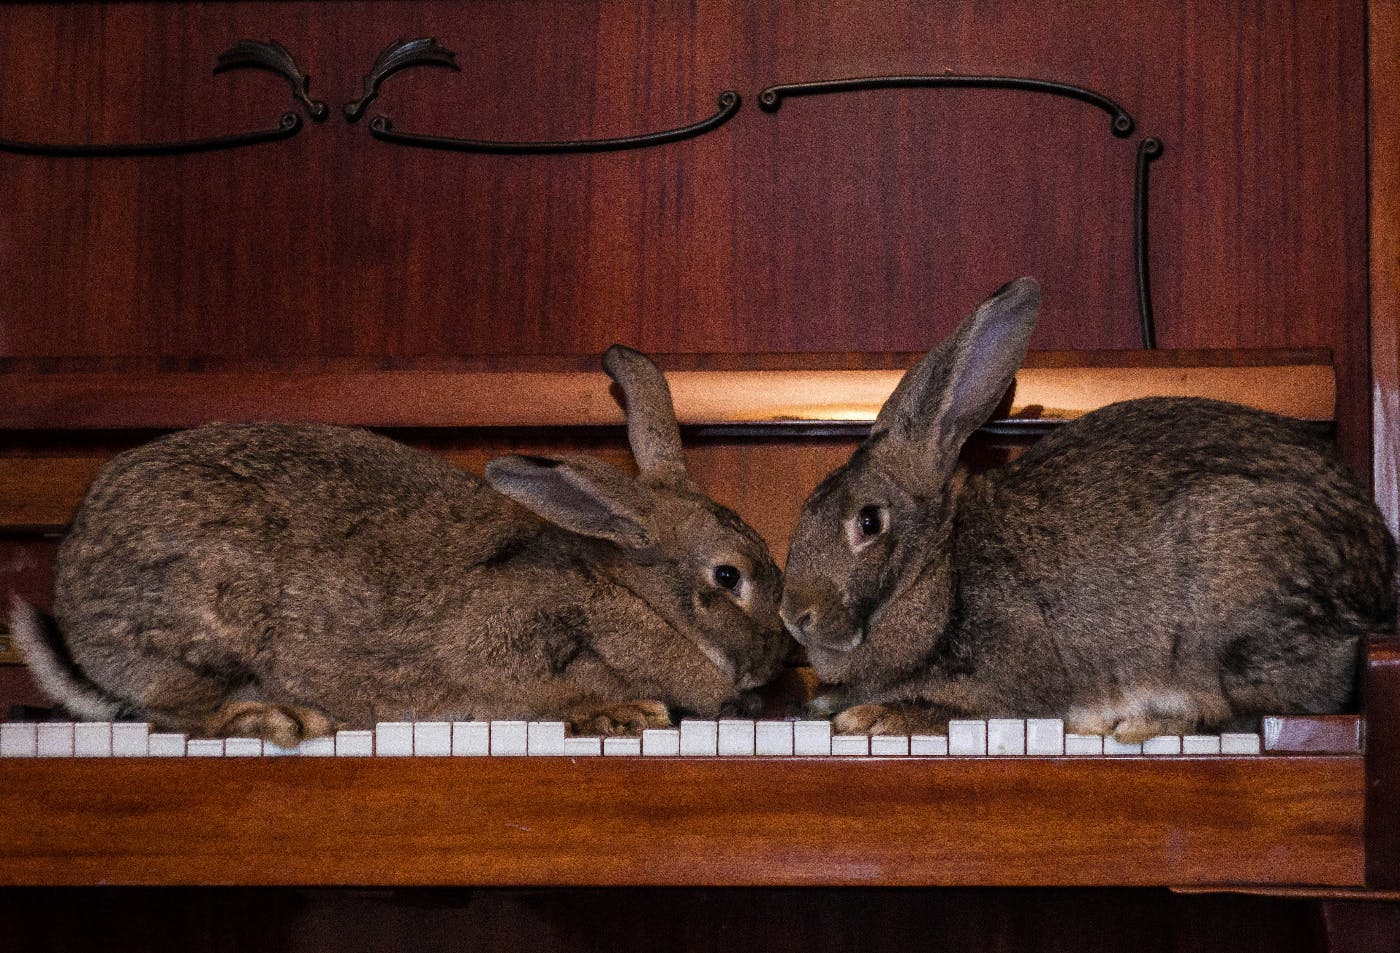 Two brown rabbits face to face on a piano keyboard